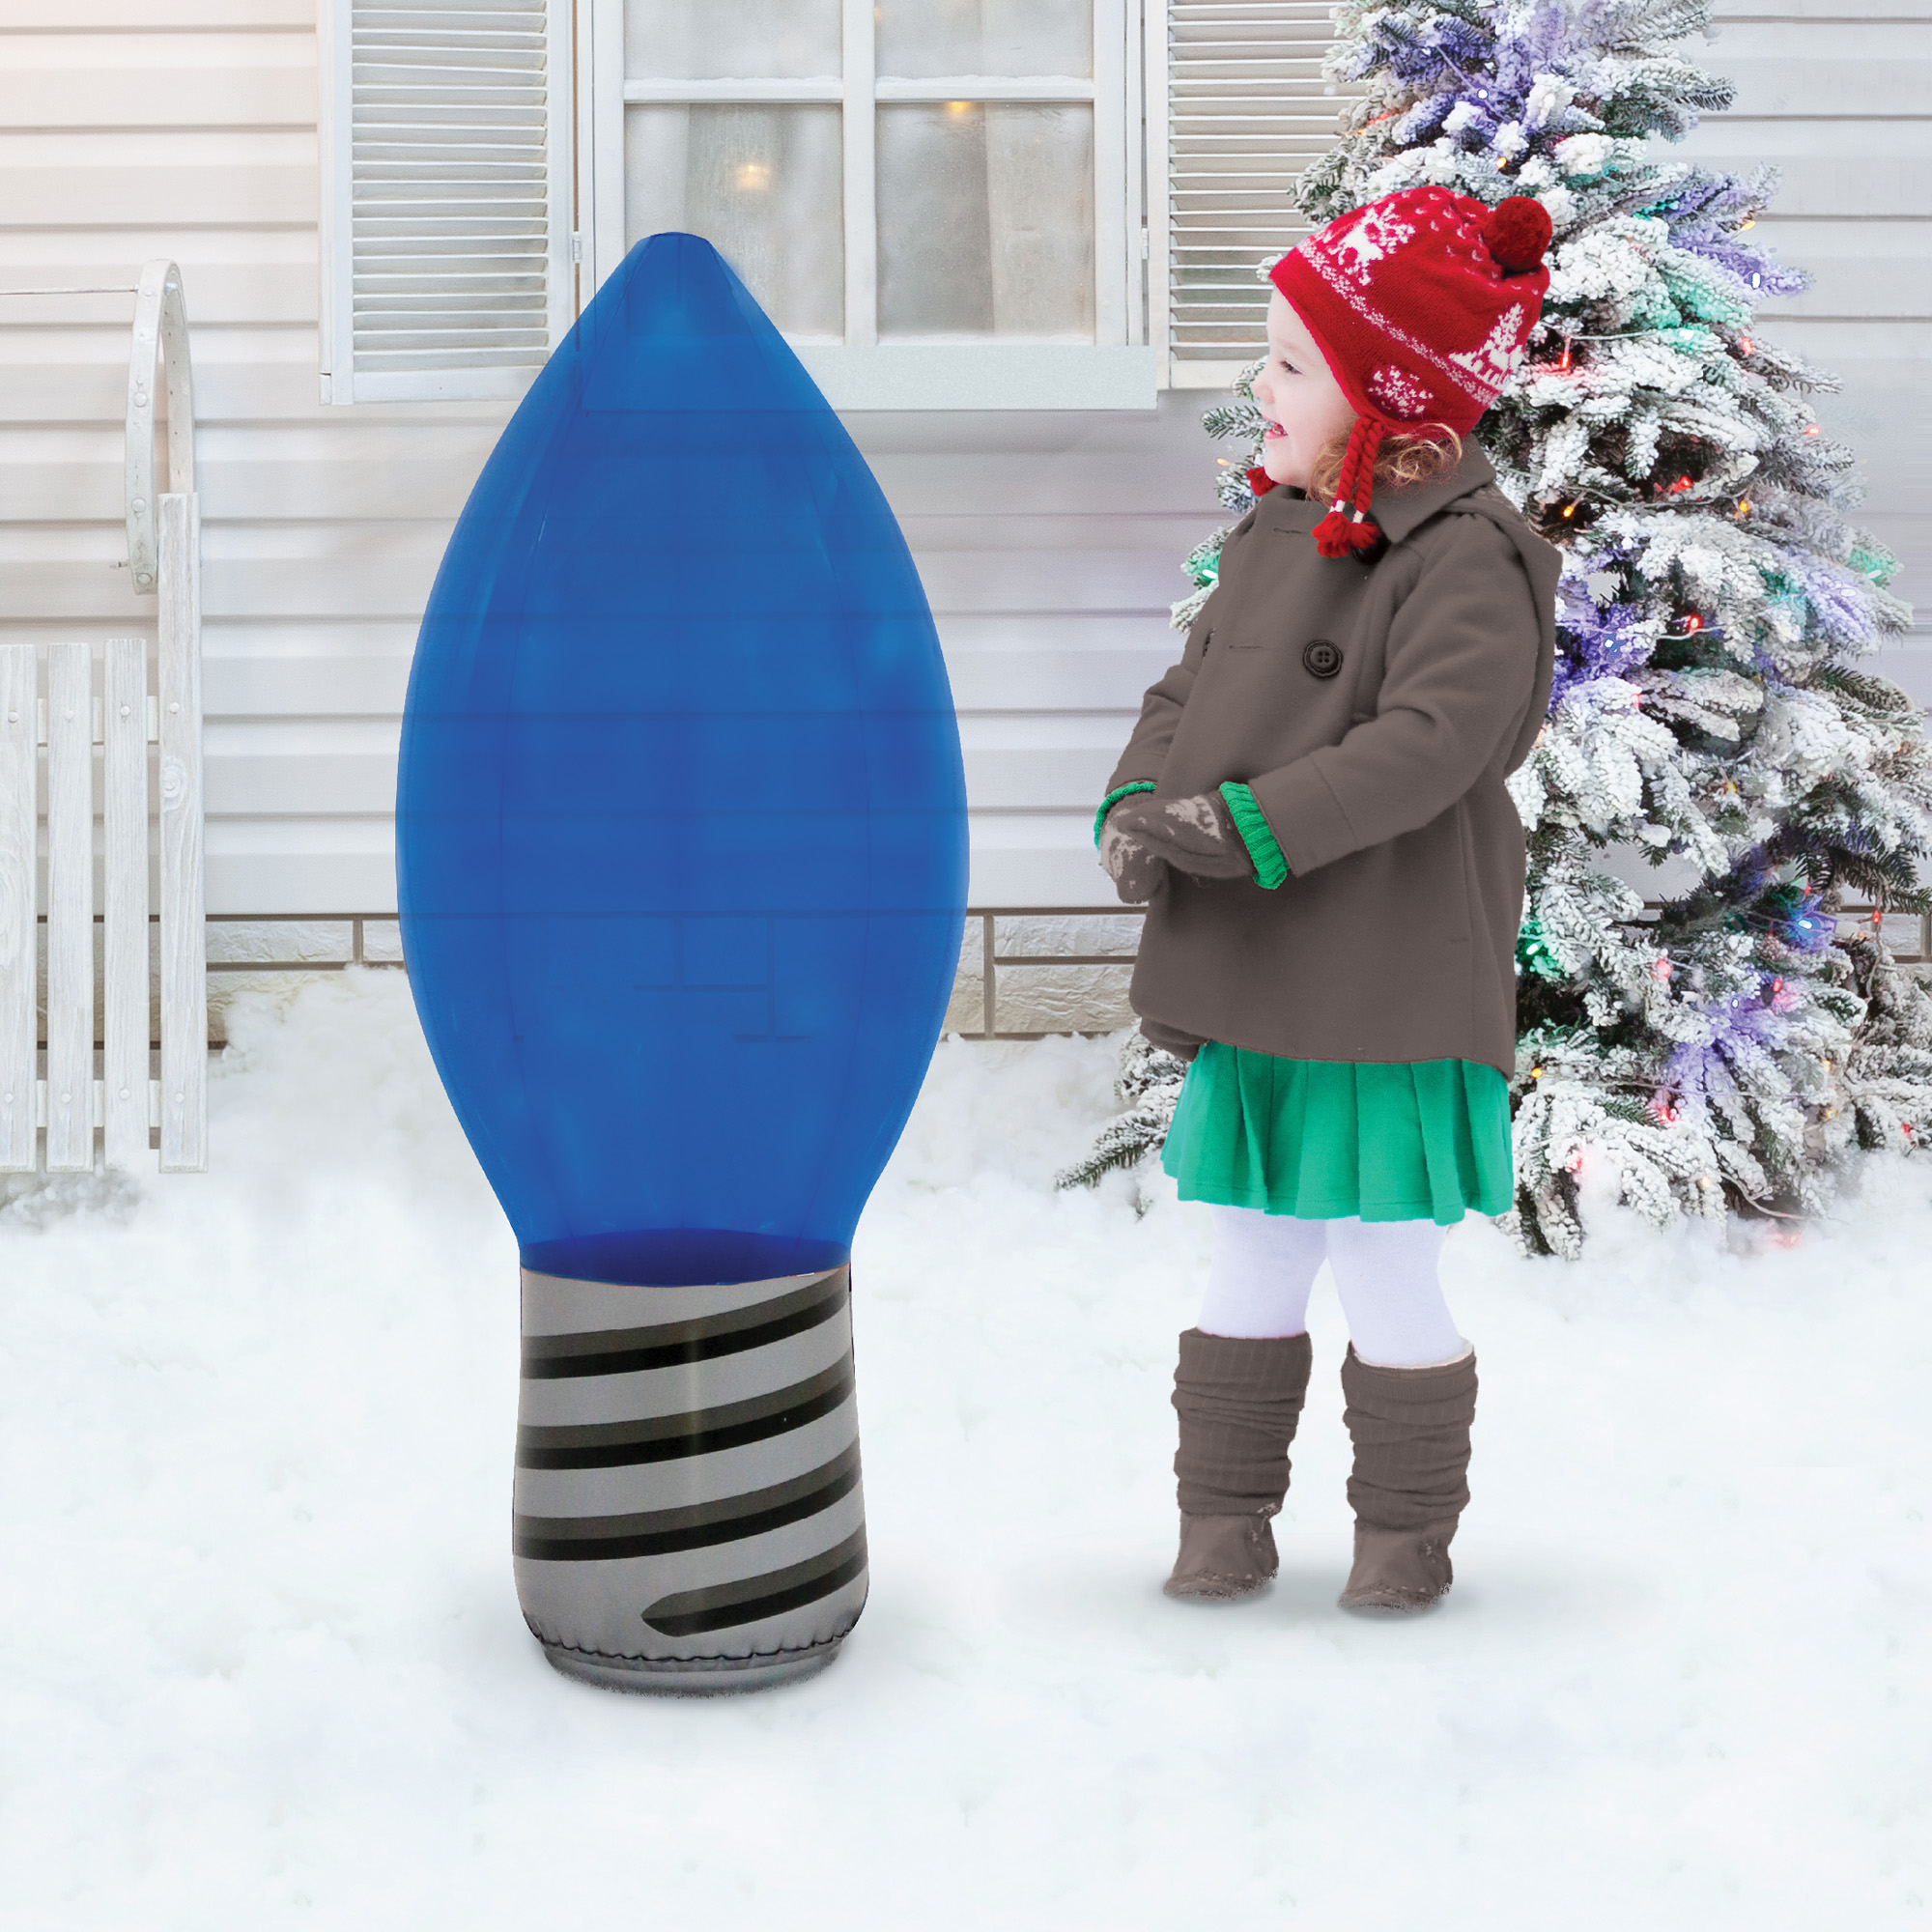 Holiday Time Blow Up Blue Light Bulb, 3.3' - image 1 of 5